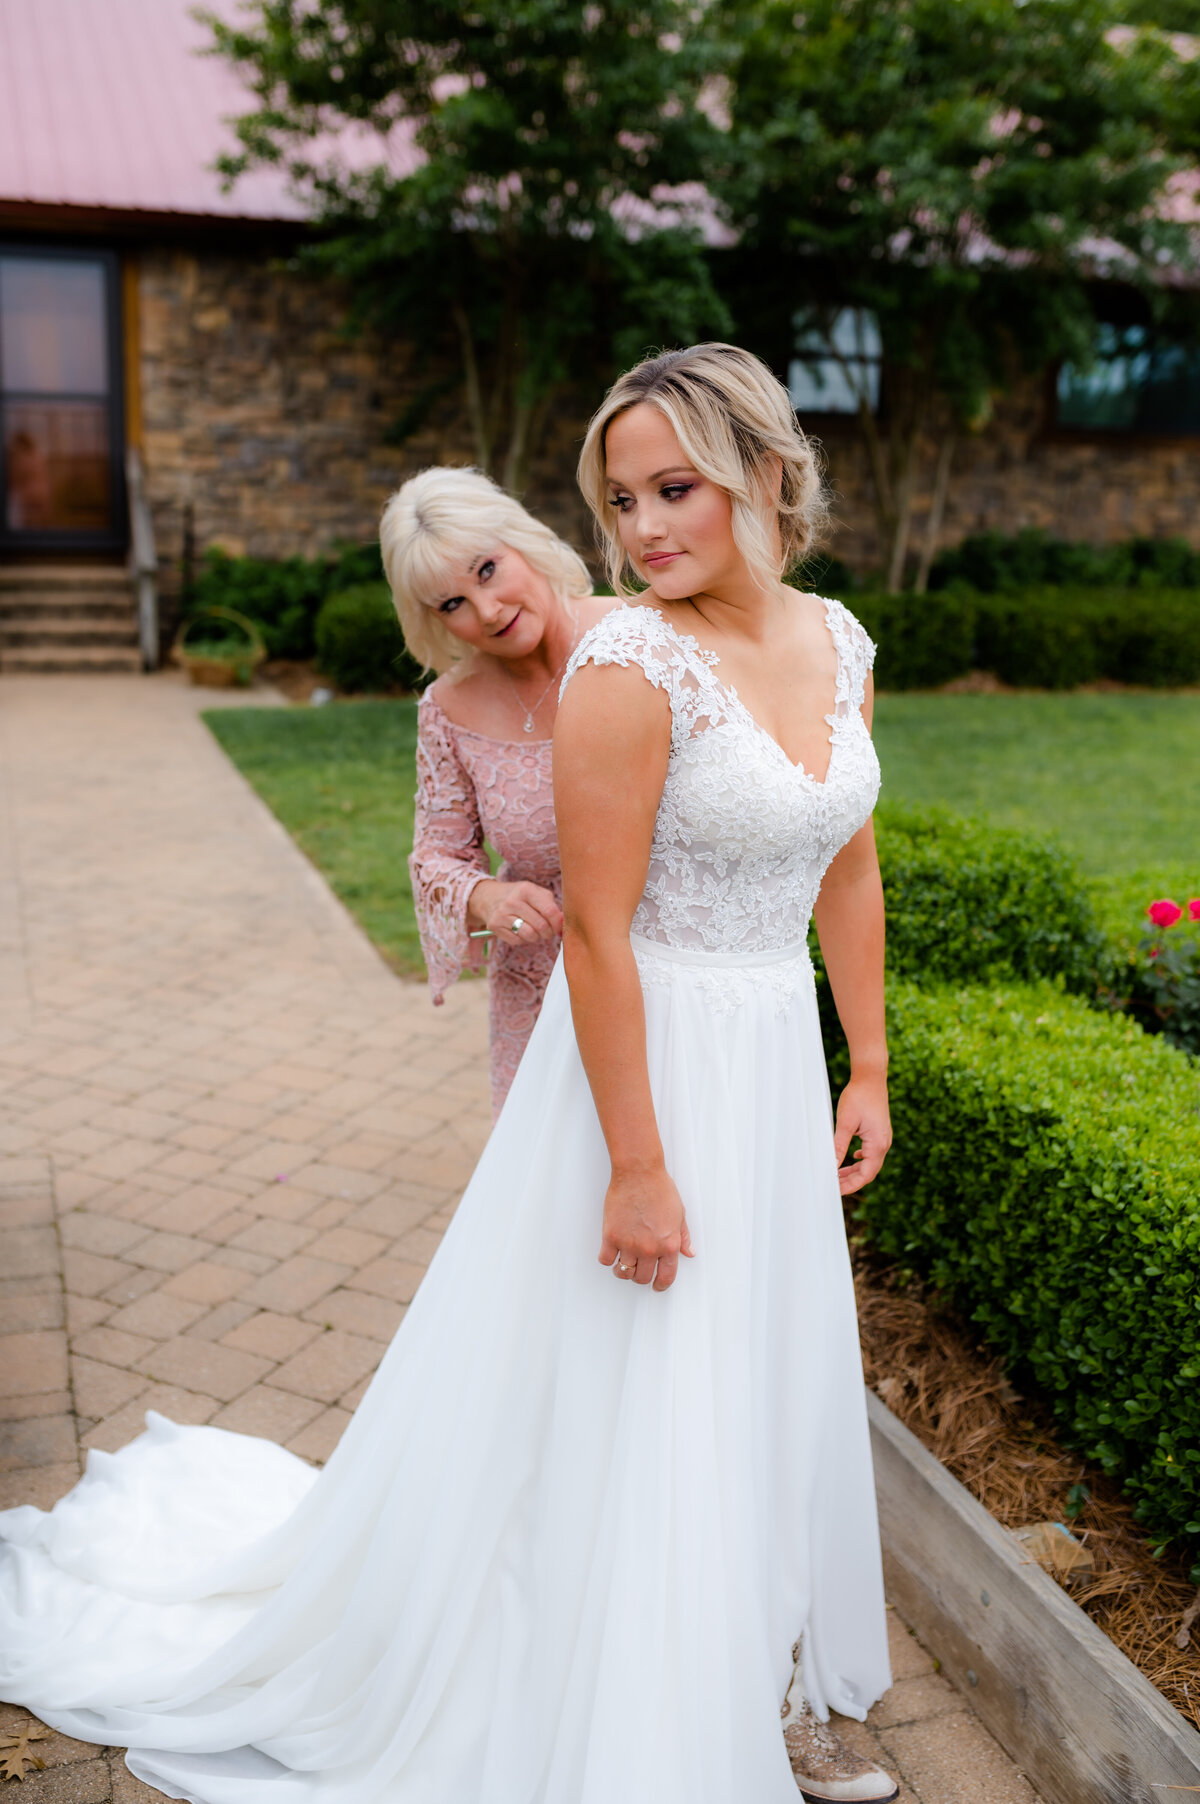 Little Rock wedding photographer captures mother of the bride zipping up the brides wedding dress as they standing together in and outdoor garden in little rock ar